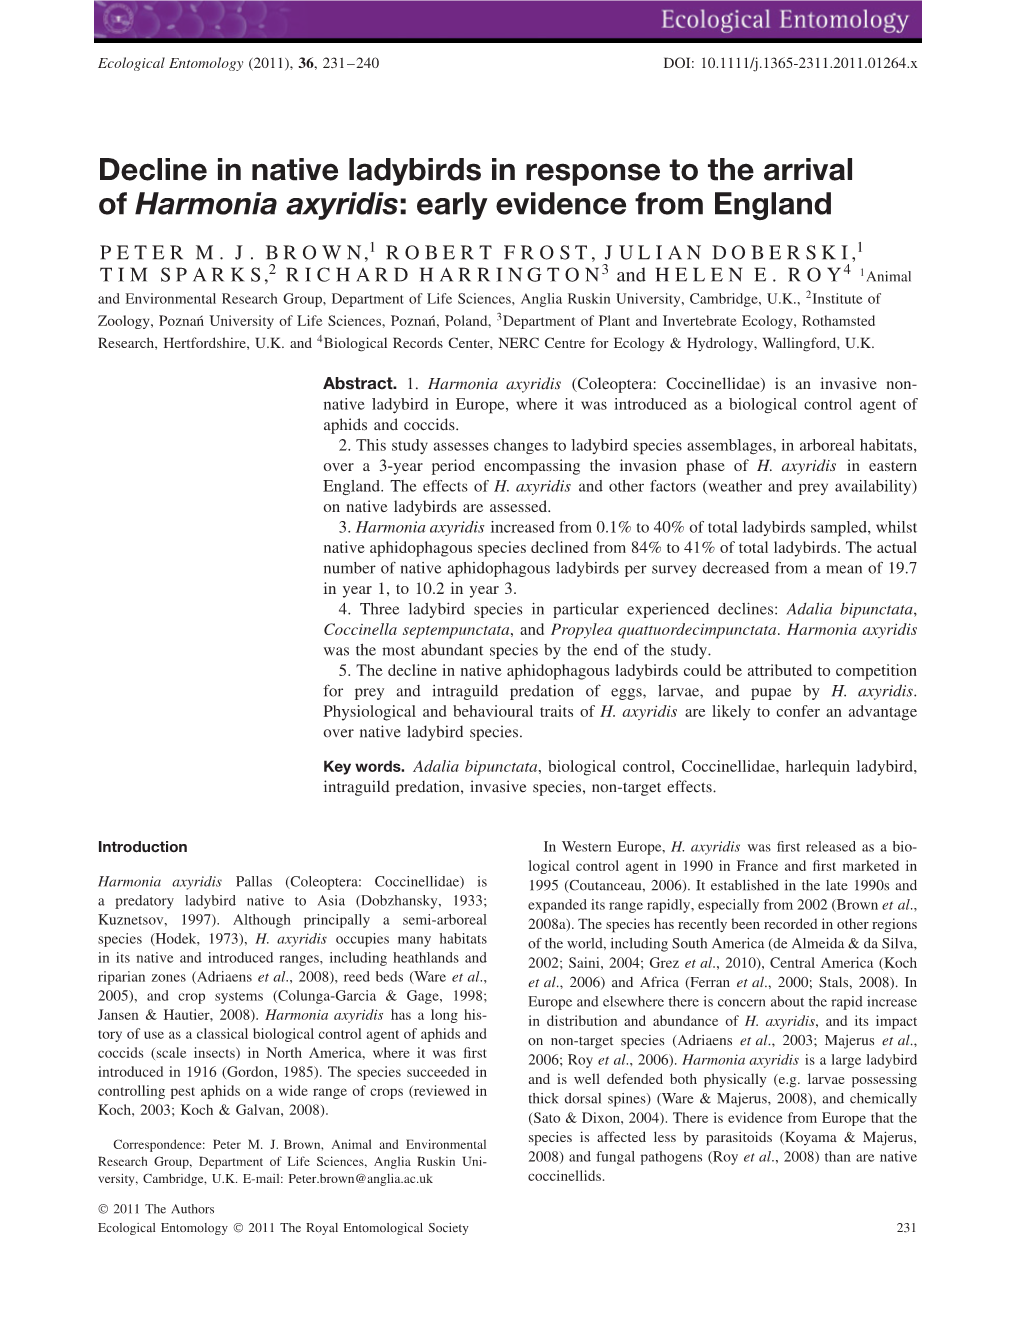 Decline in Native Ladybirds in Response to the Arrival of Harmonia Axyridis: Early Evidence from England